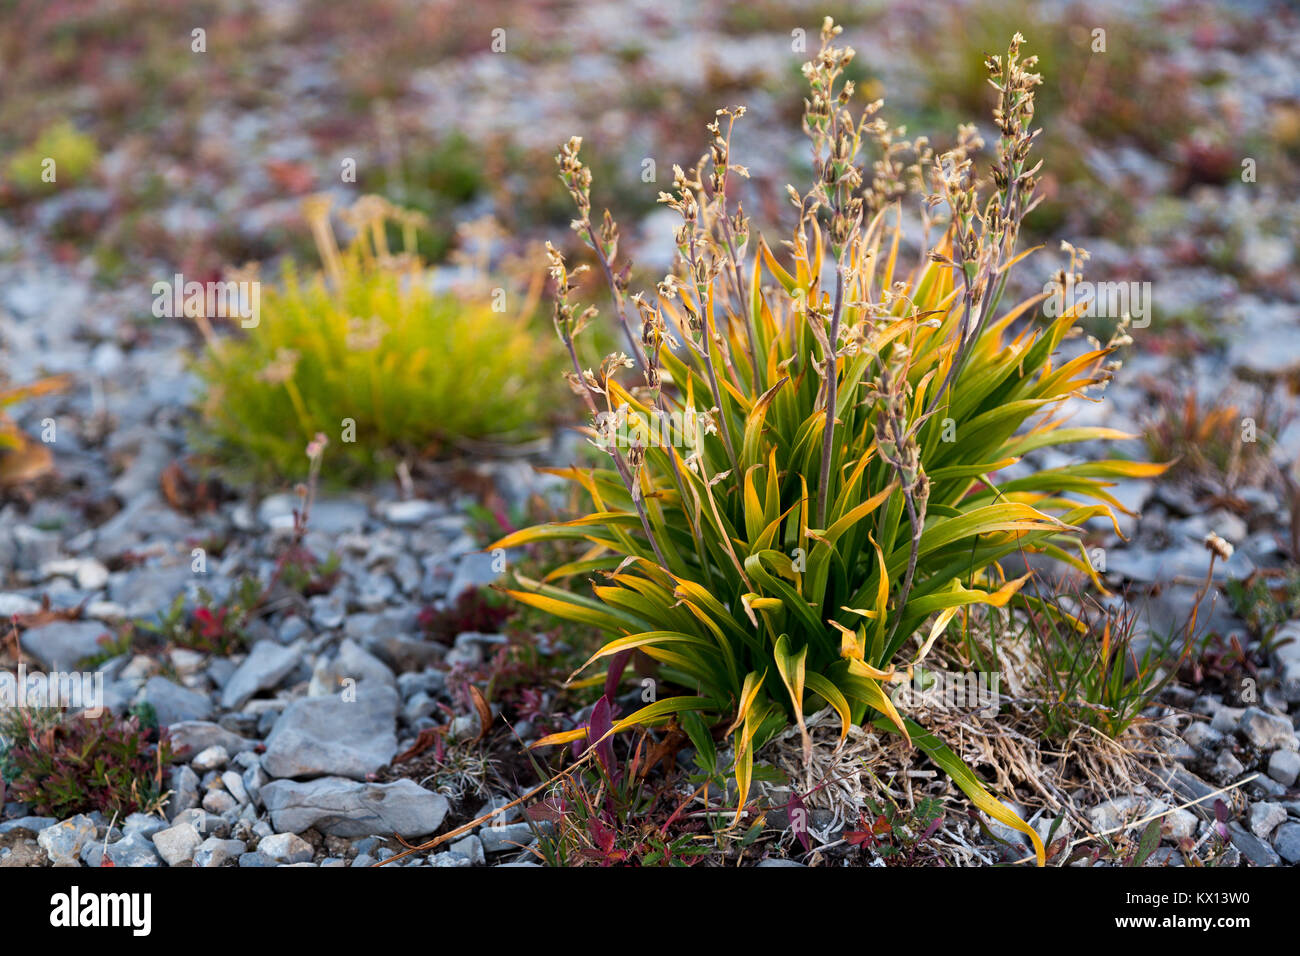 A small alpine tundra plant growing from the rocks making up Hurricane Pass in the Teton Mountains. Jedediah Smith Wilderness, Wyoming Stock Photo